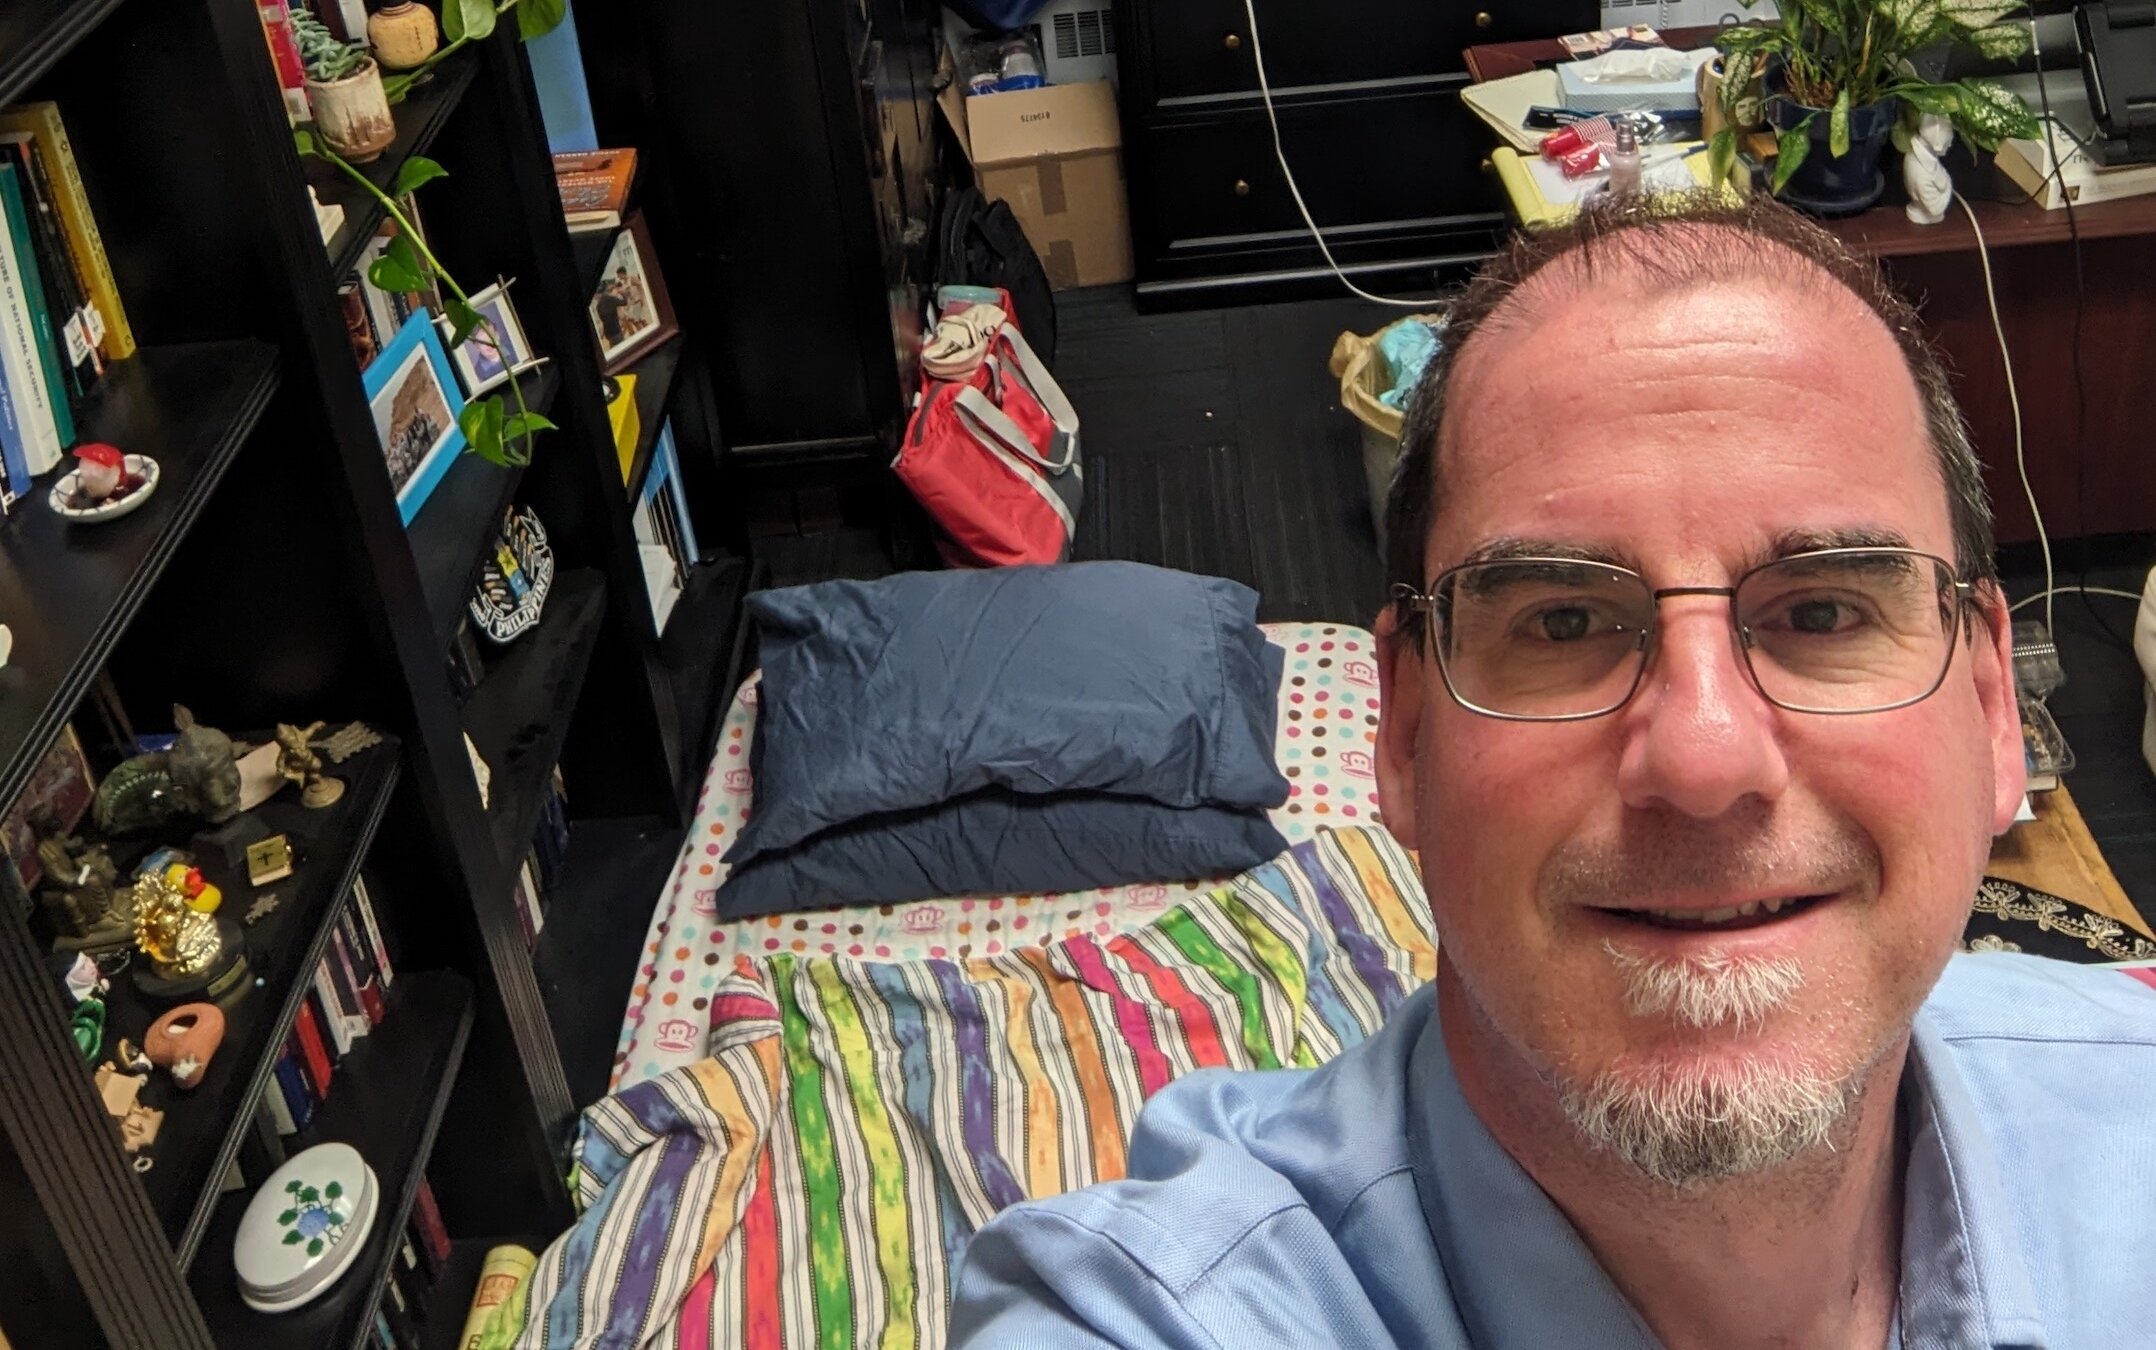 Ron Hassner, chair of the Israel studies program at the University of California, Berkeley, is holding a one-man sit-in in his office to press the university to better address tensions among students heightened by the Israel-Hamas war. (Courtesy Hassner)